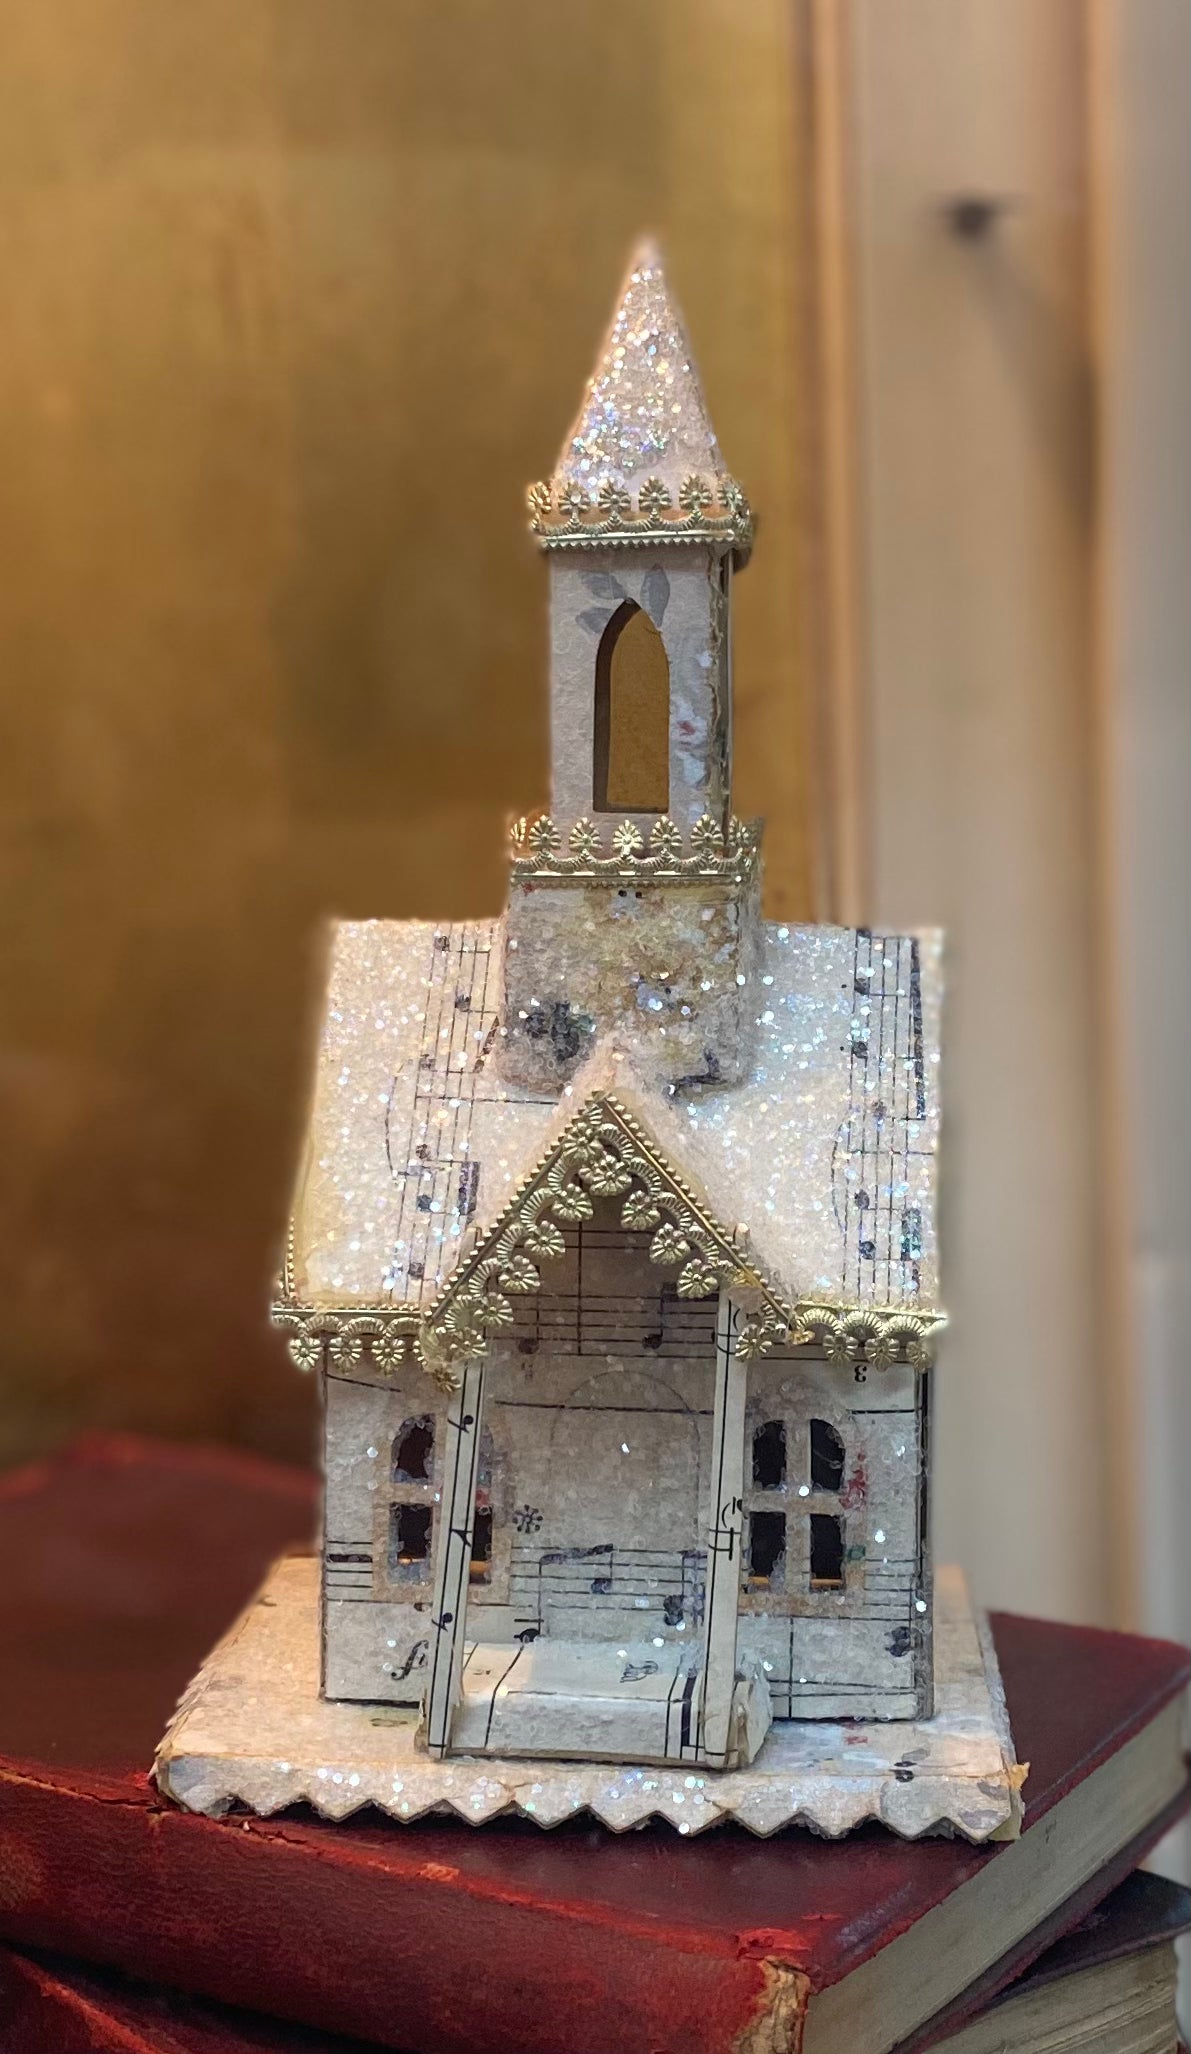 Vintage Paper Cottages or Churches on Saturday December 9th, 1:30- 4:00 pm